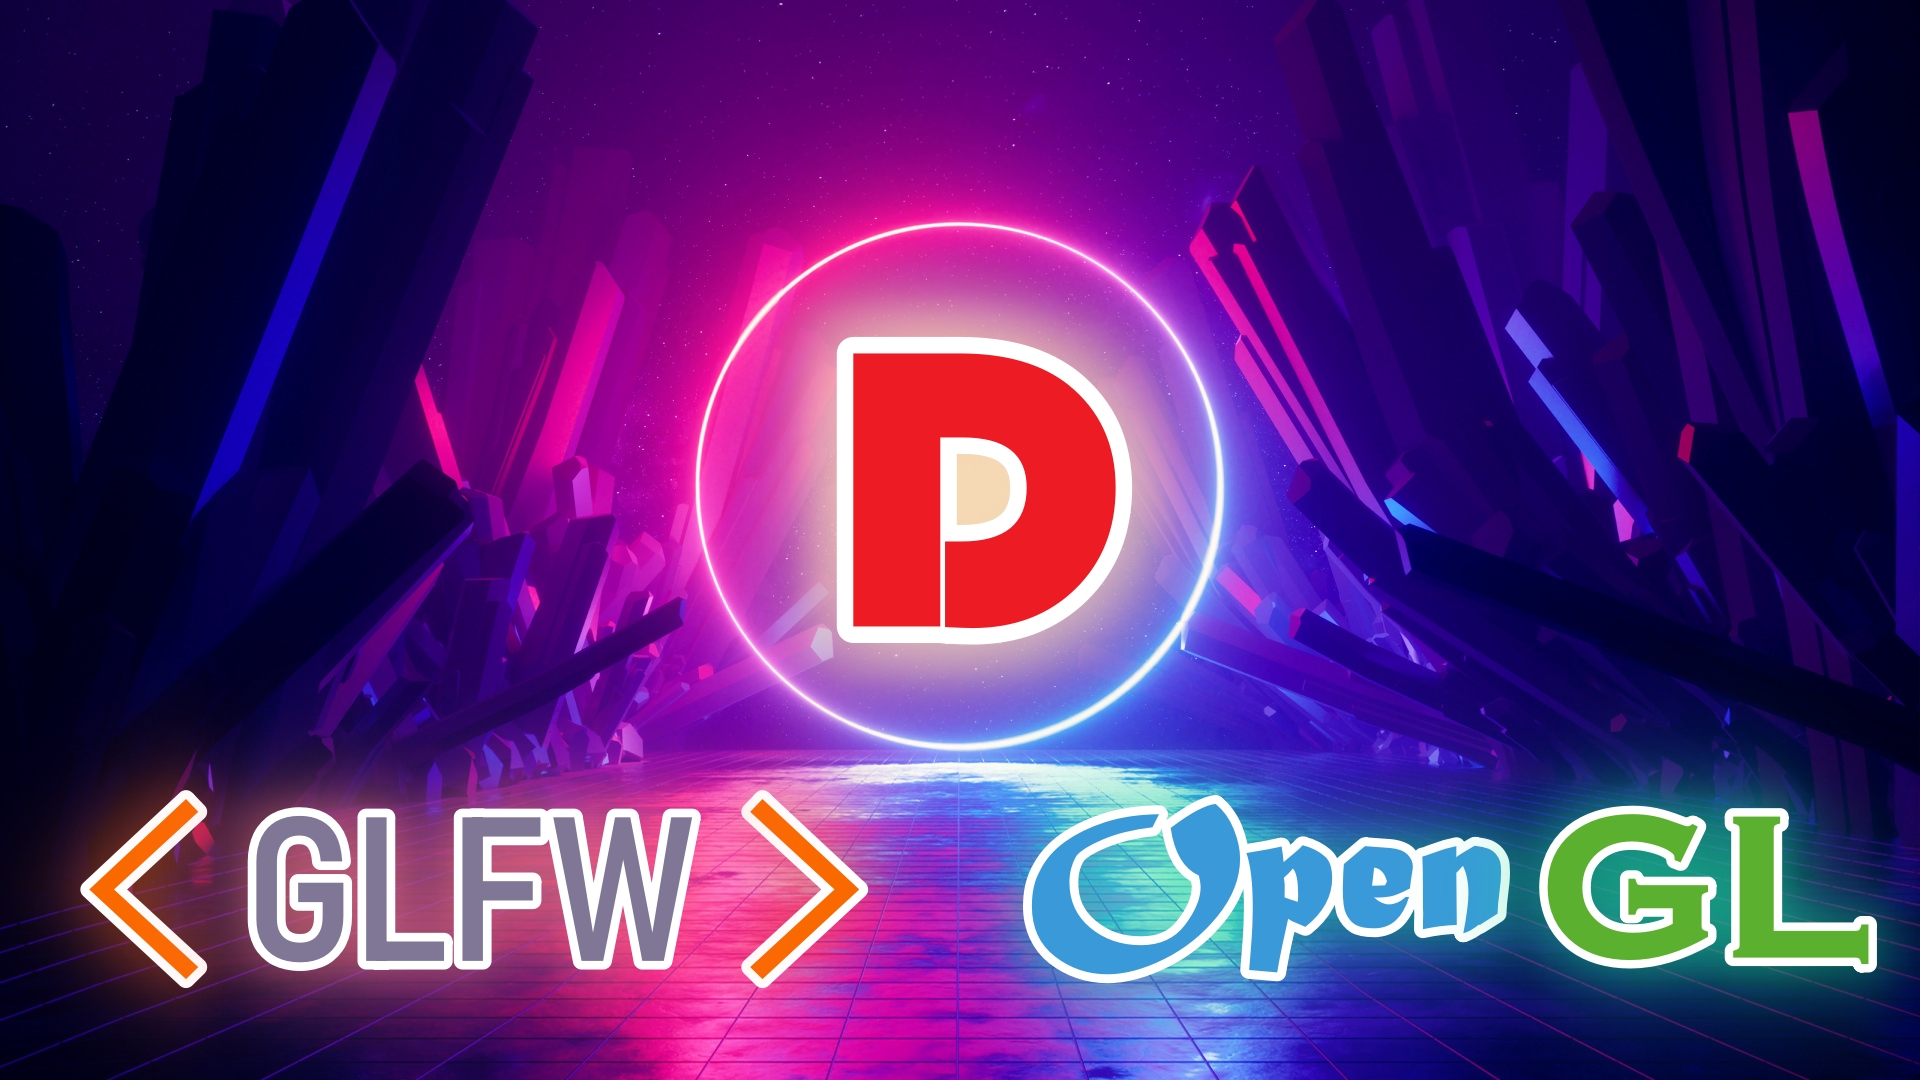 D and GLFW/OpenGL project